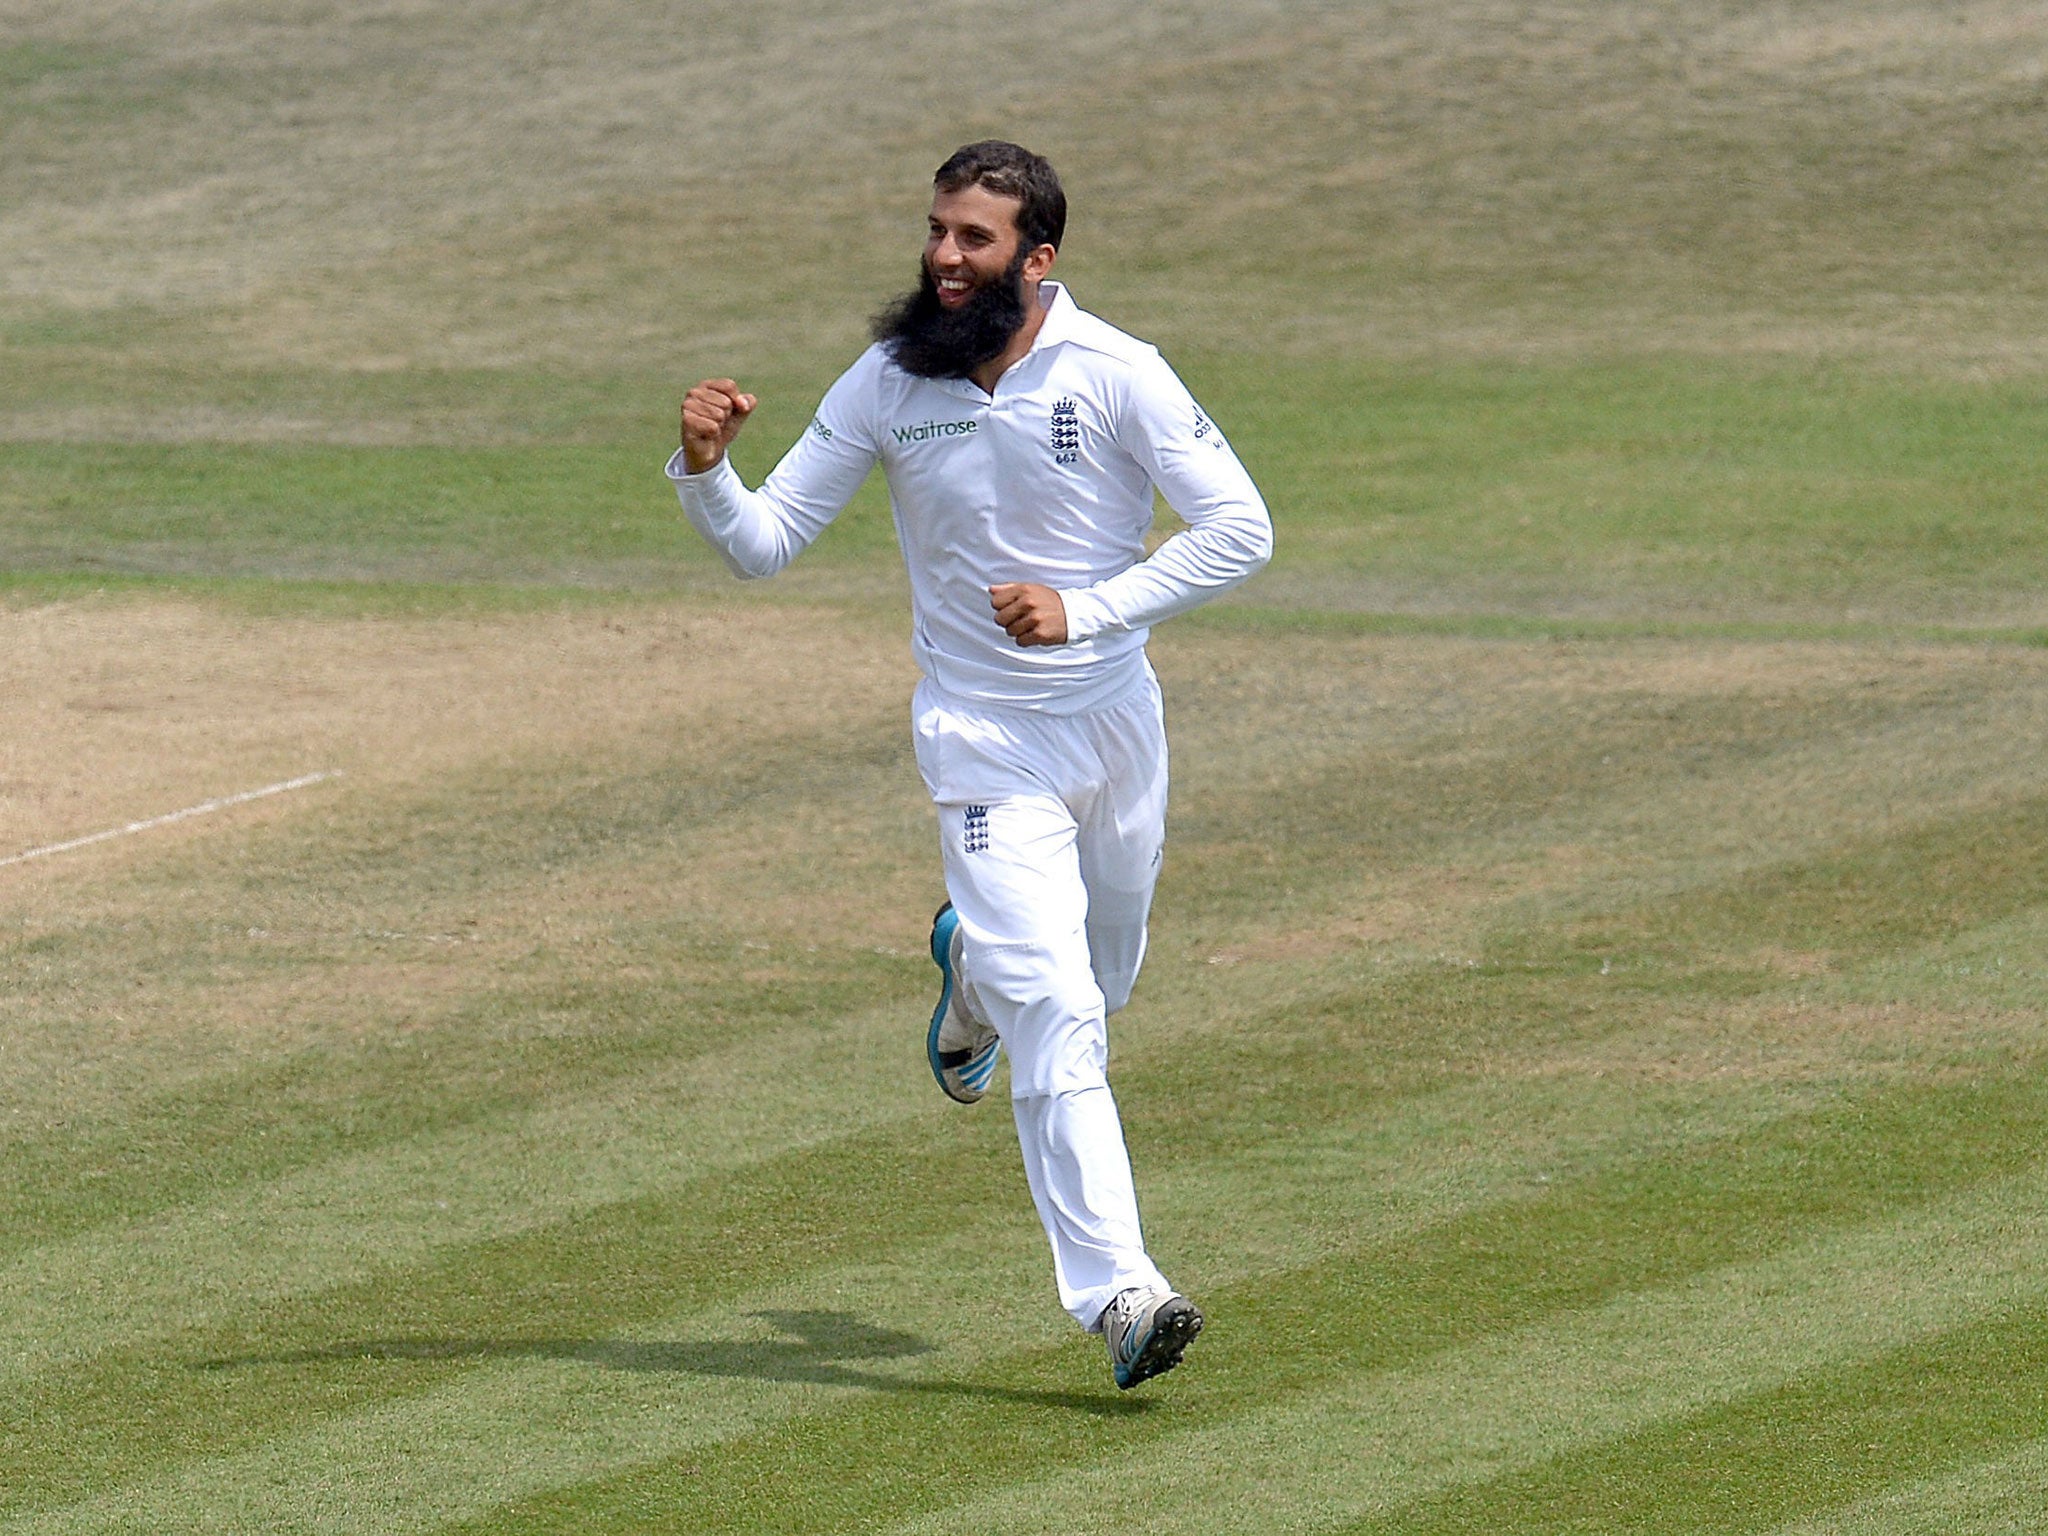 Could Moeen Ali be England's new No 6?